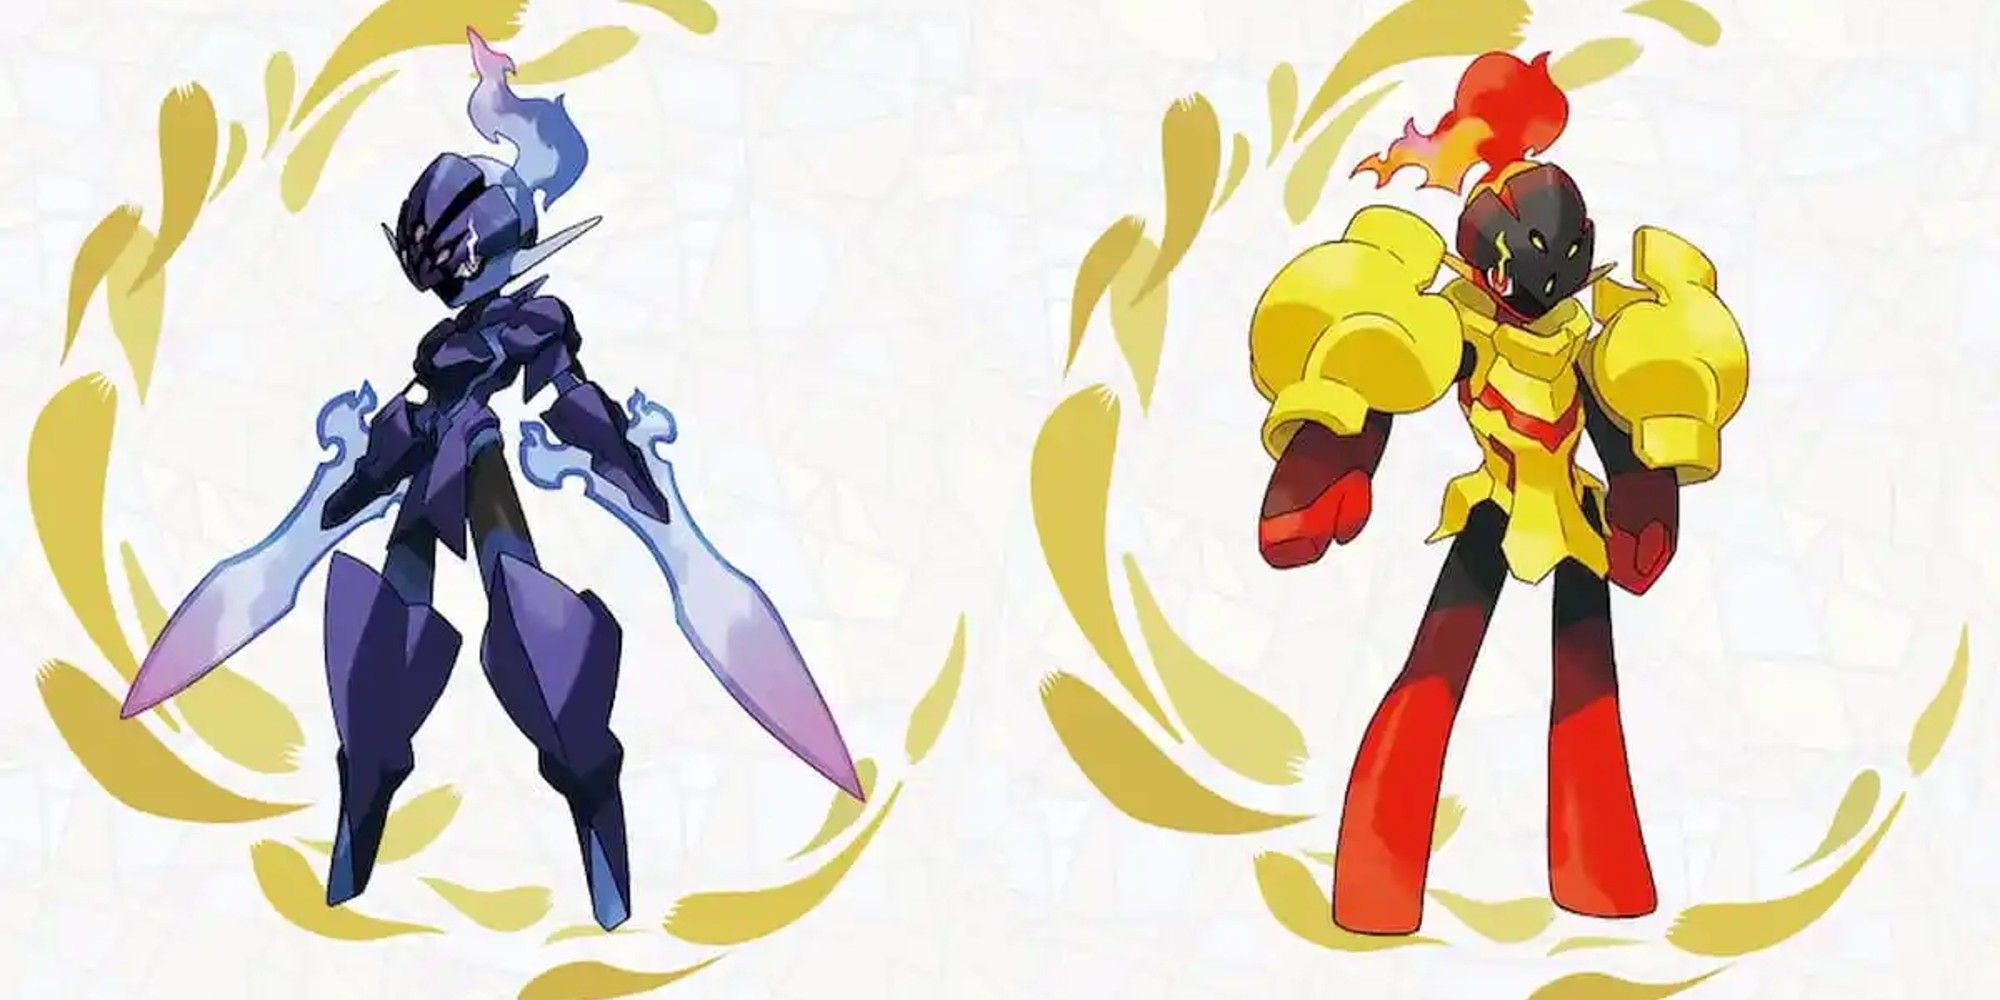 Arnourage & Ceruledge from Pokemon Scarlet And Violet, promo pictures